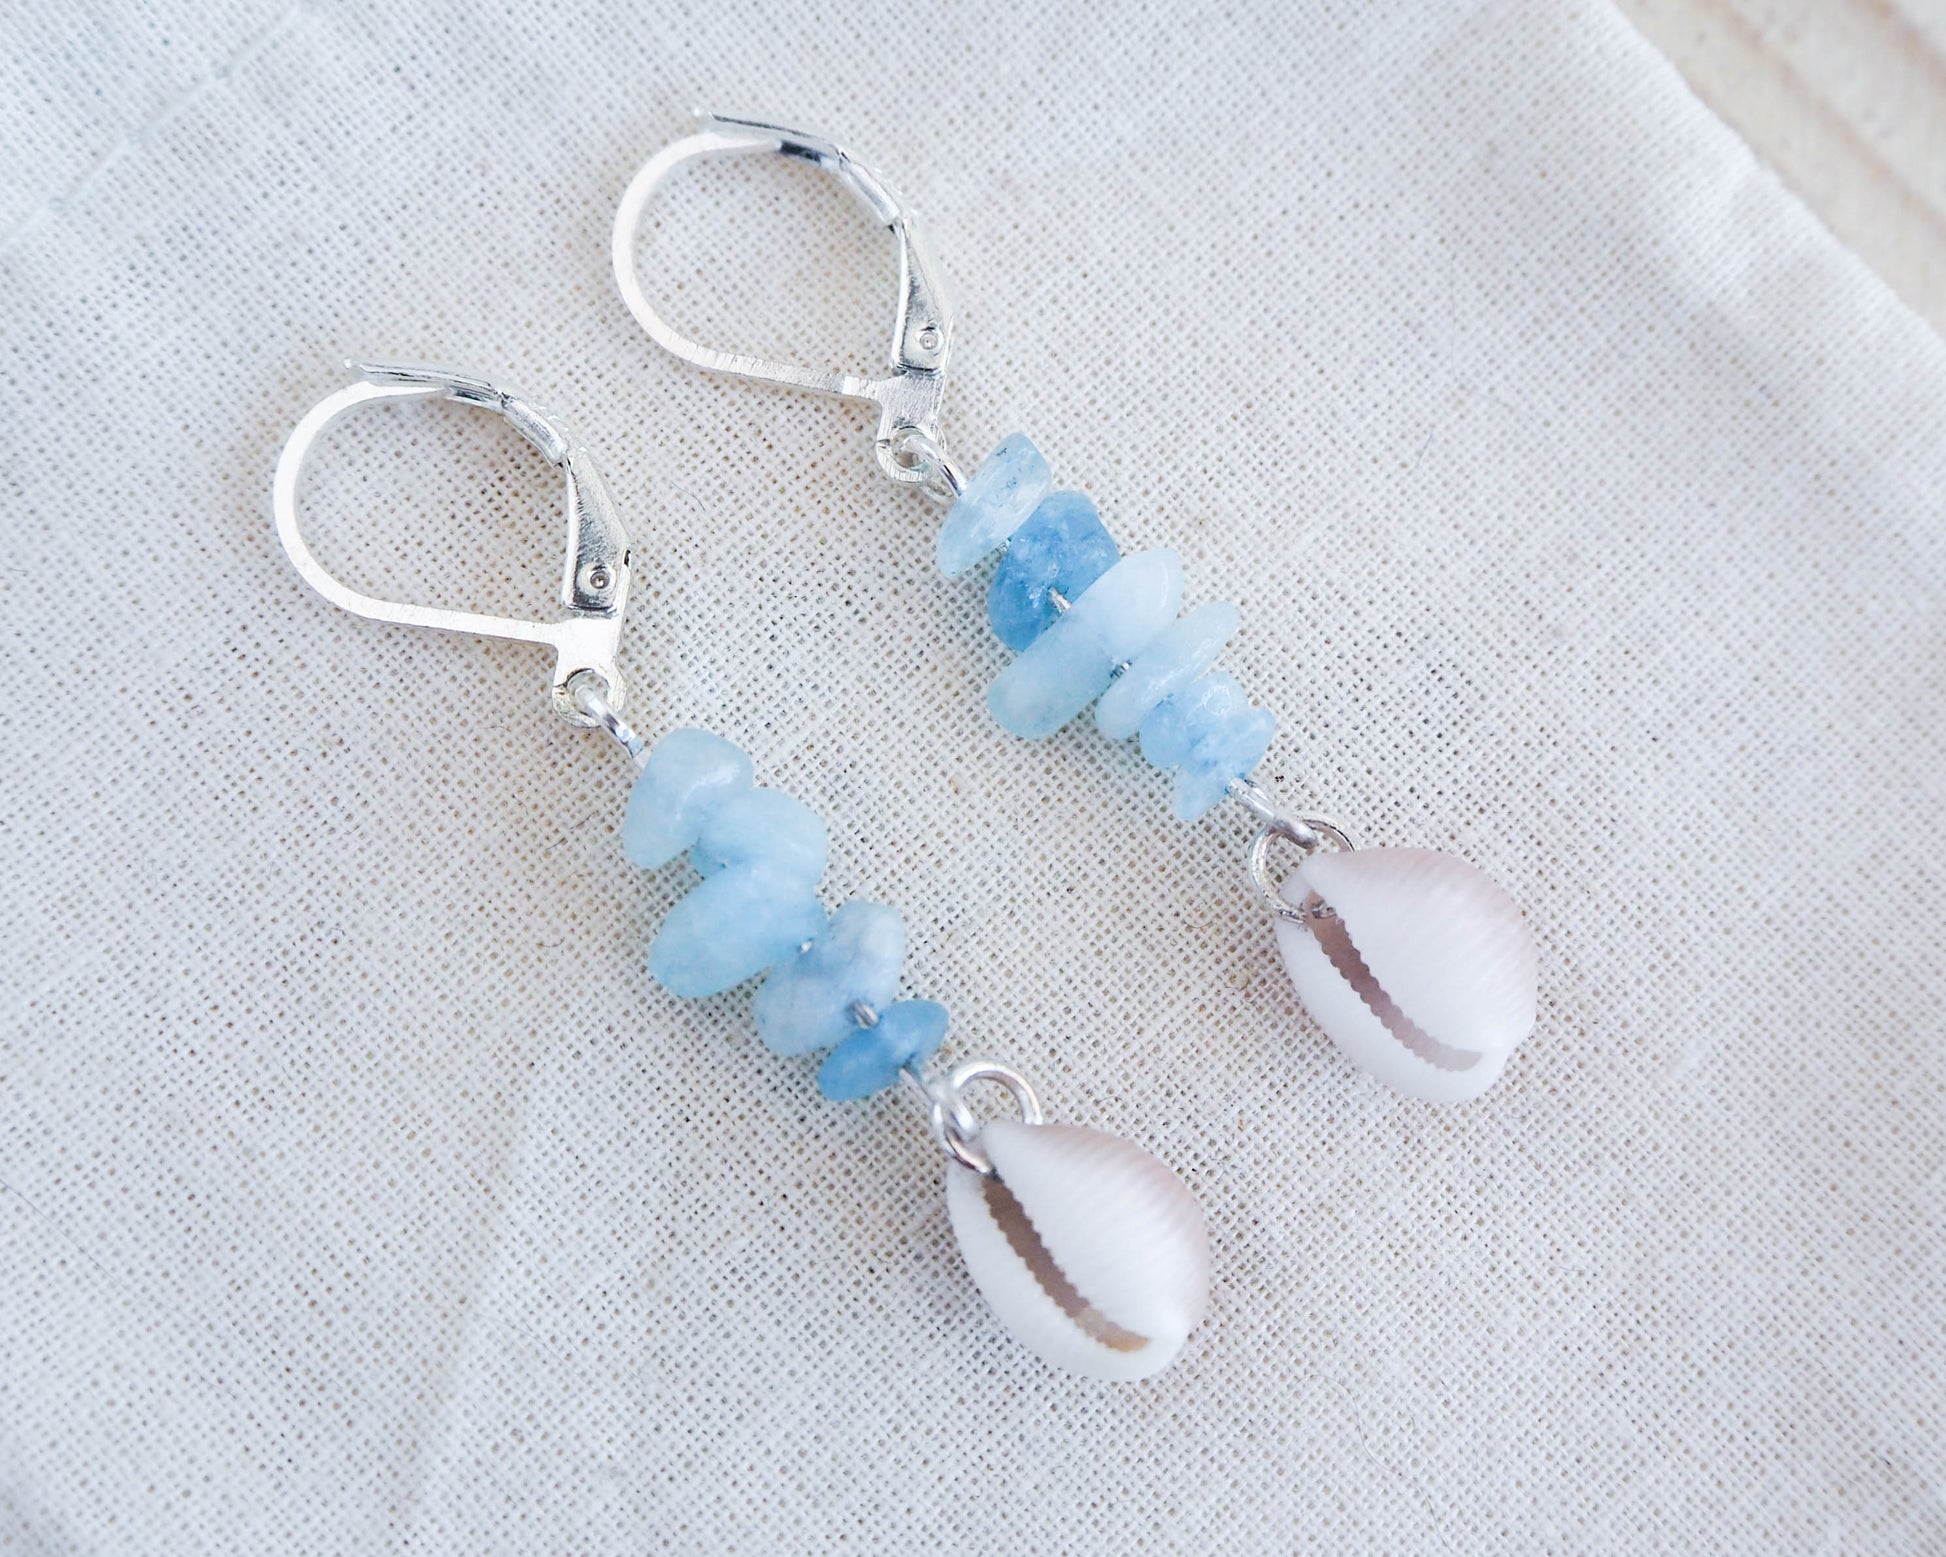 Handcrafted Cowrie Shell Earrings with Aquamarine Stones - a Beach-inspired Delight, seabylou